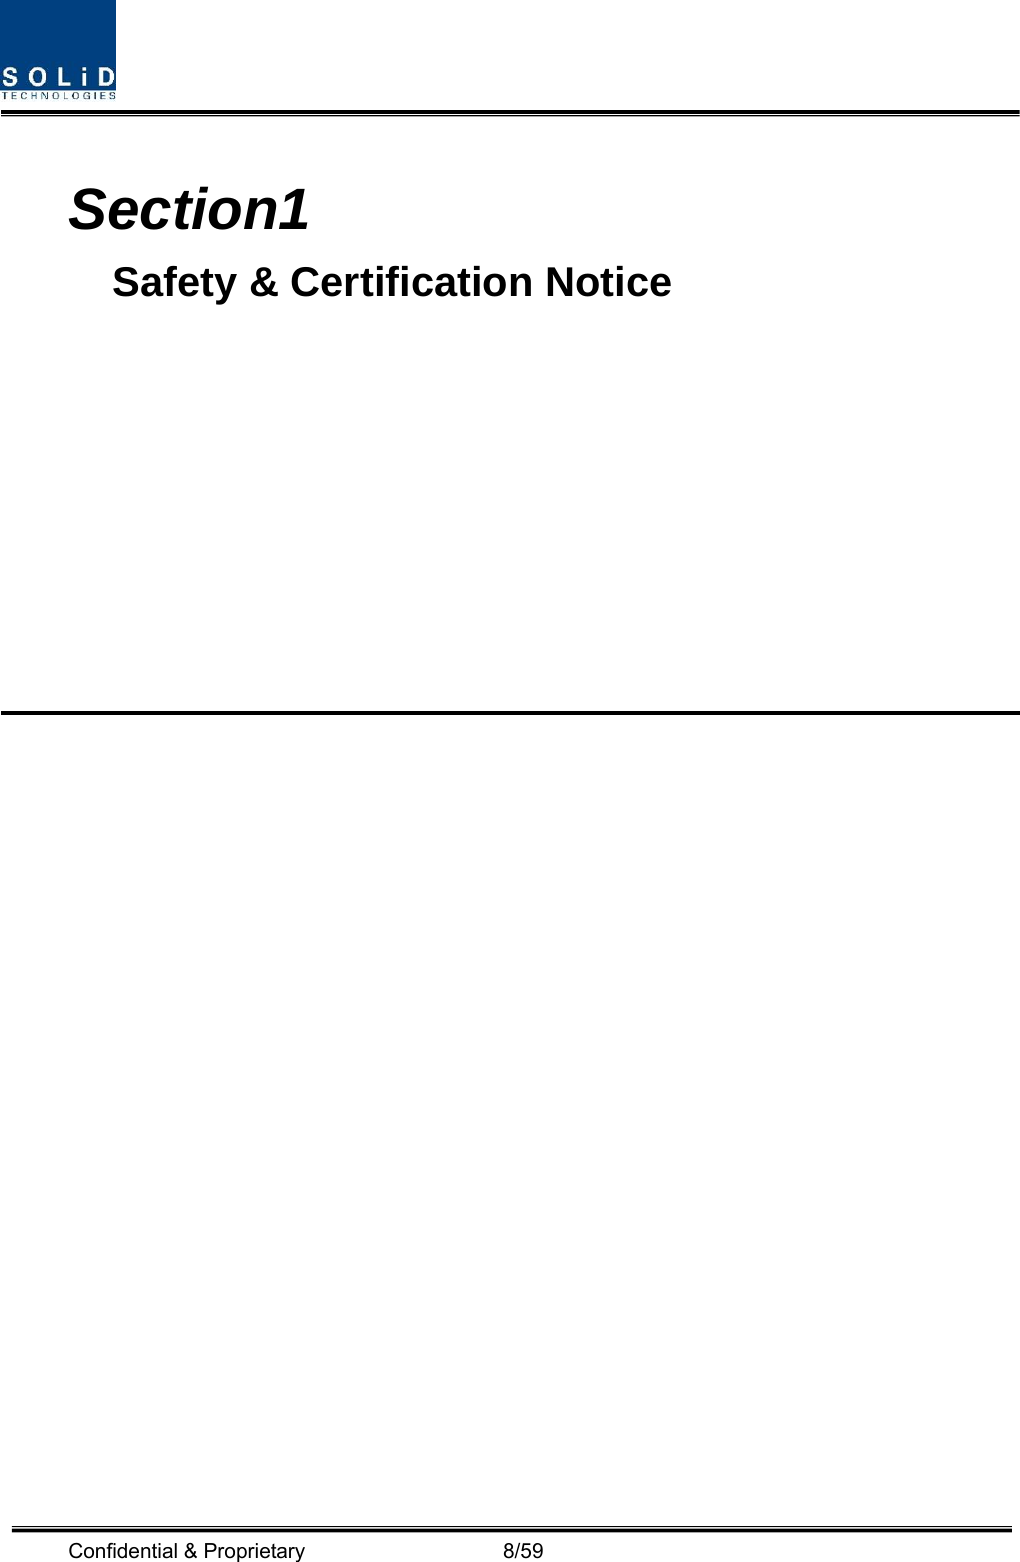  Confidential &amp; Proprietary                   8/59  Section1                                 Safety &amp; Certification Notice                                